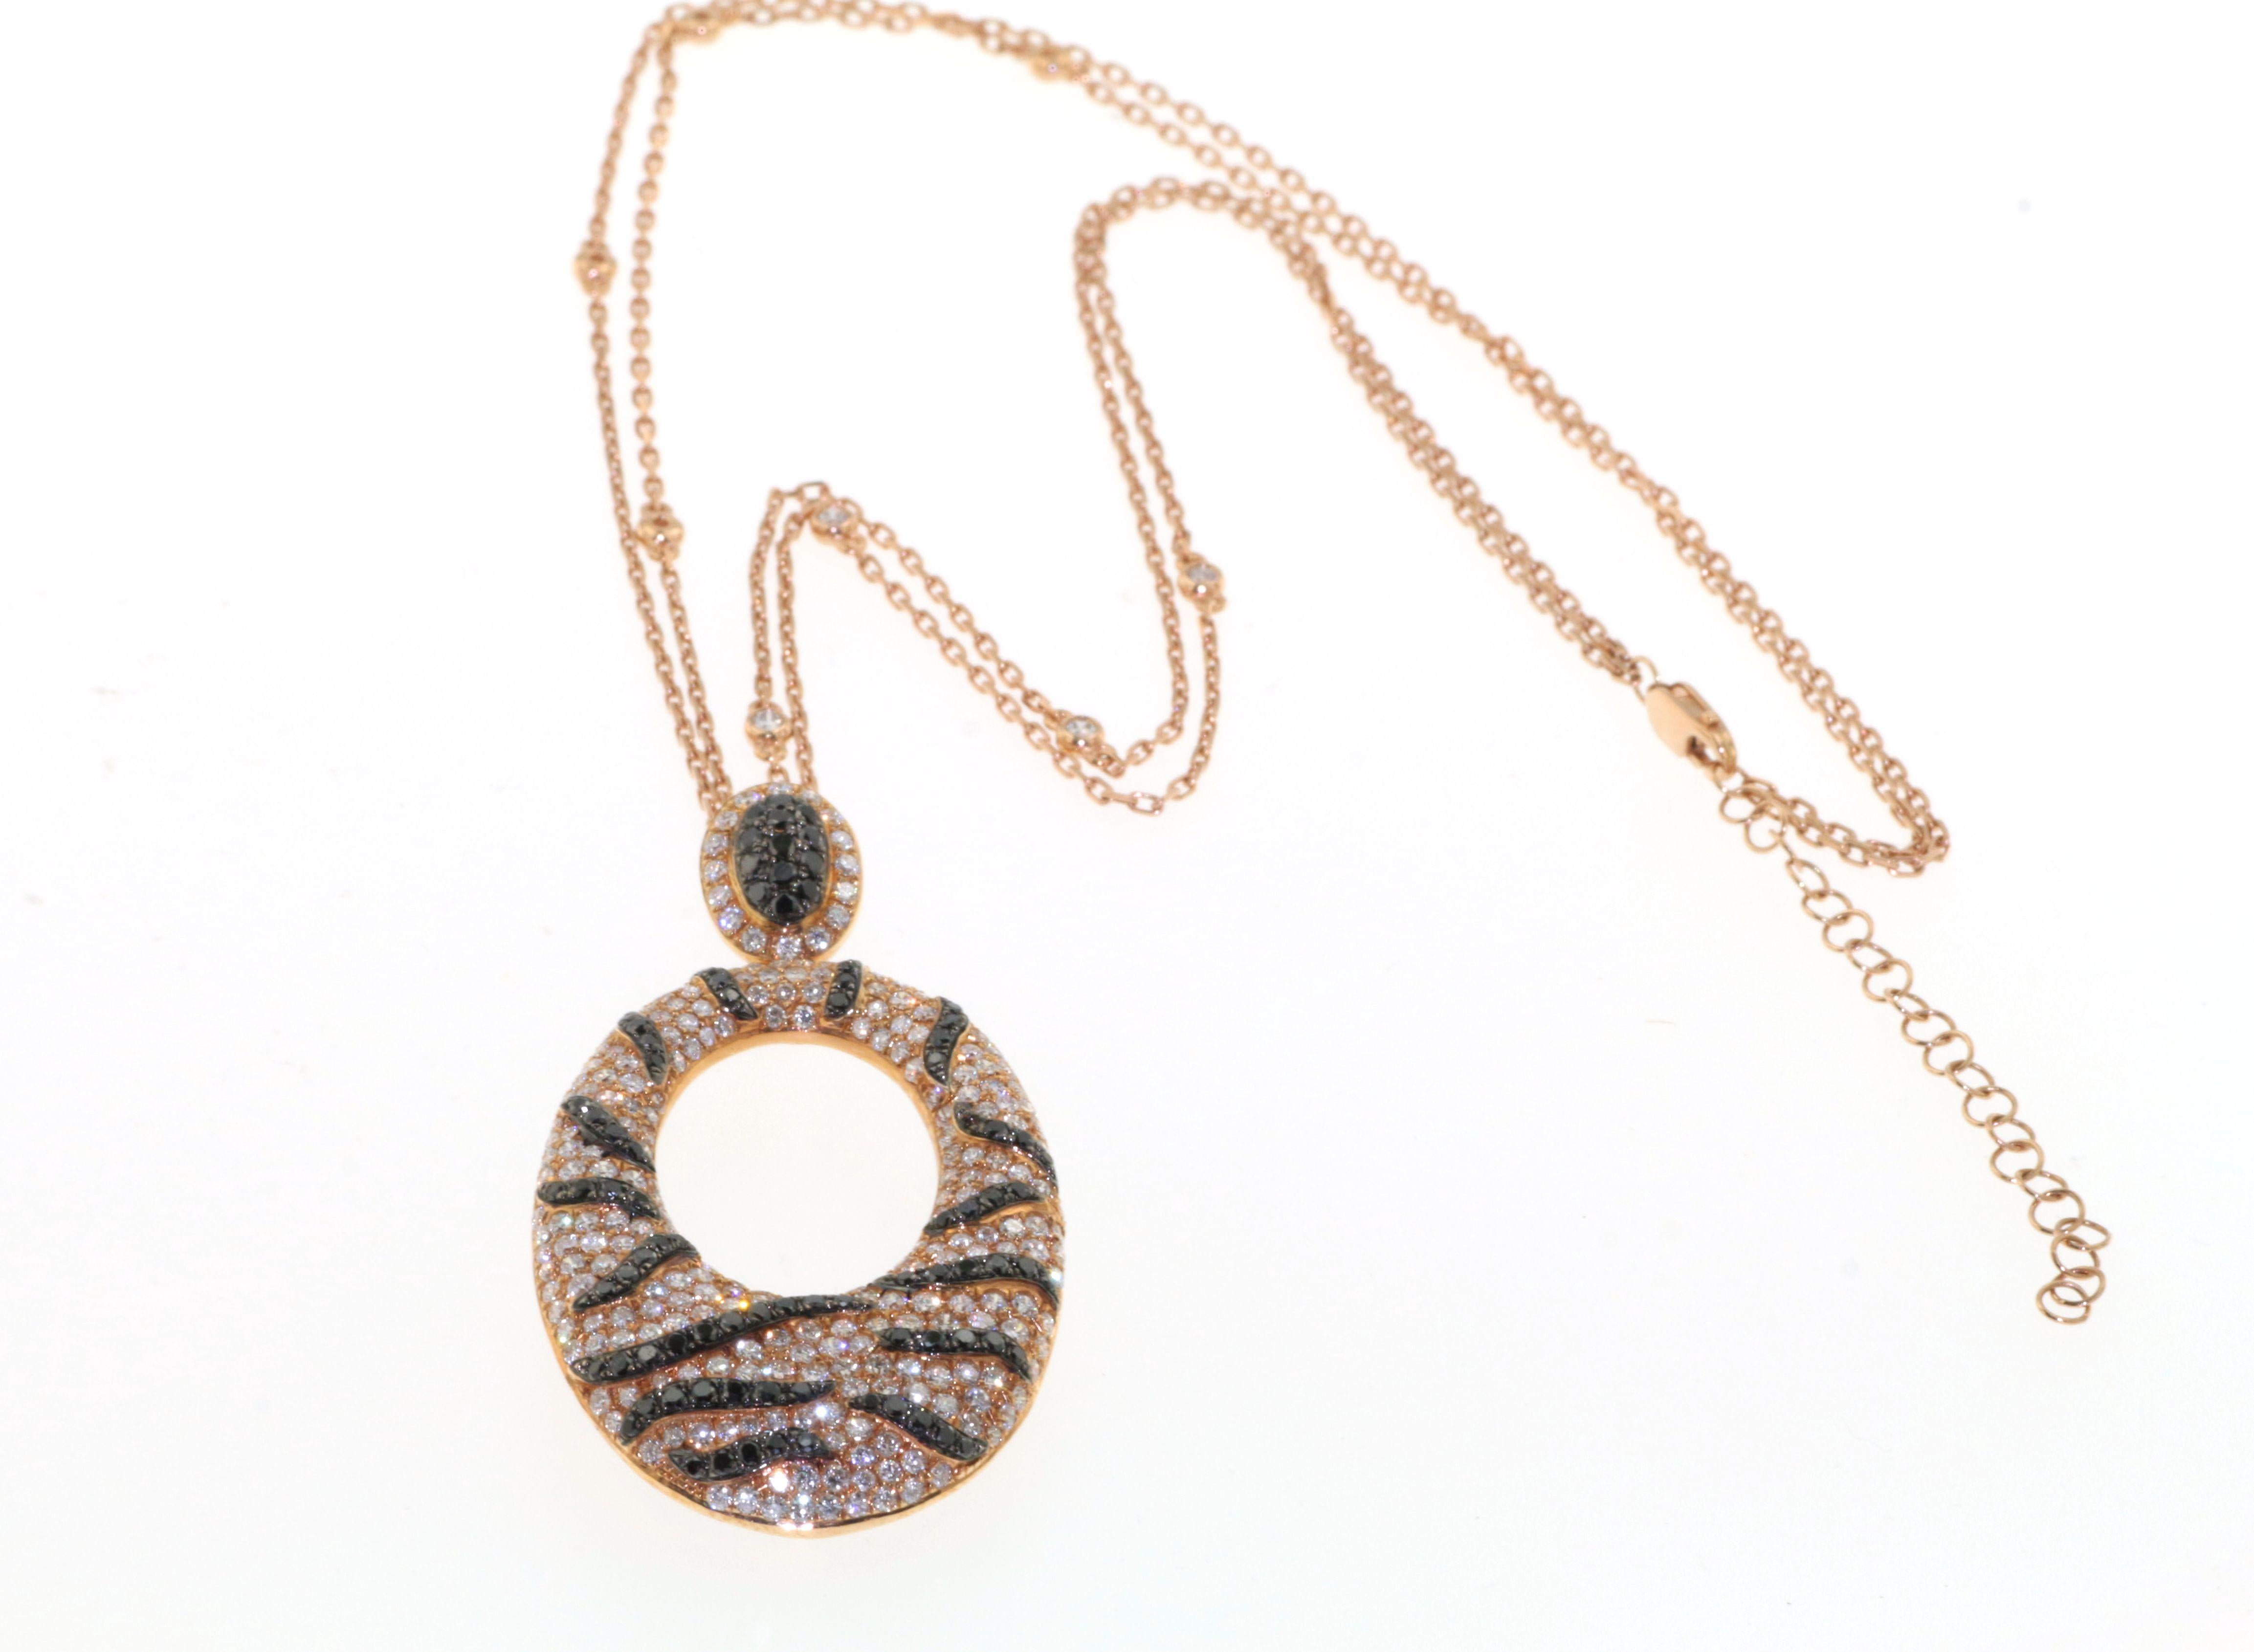 Brilliant Cut 3.83 T.C.W White and Black Diamonds Pendant with Chain in 18 Karat Rose Gold For Sale